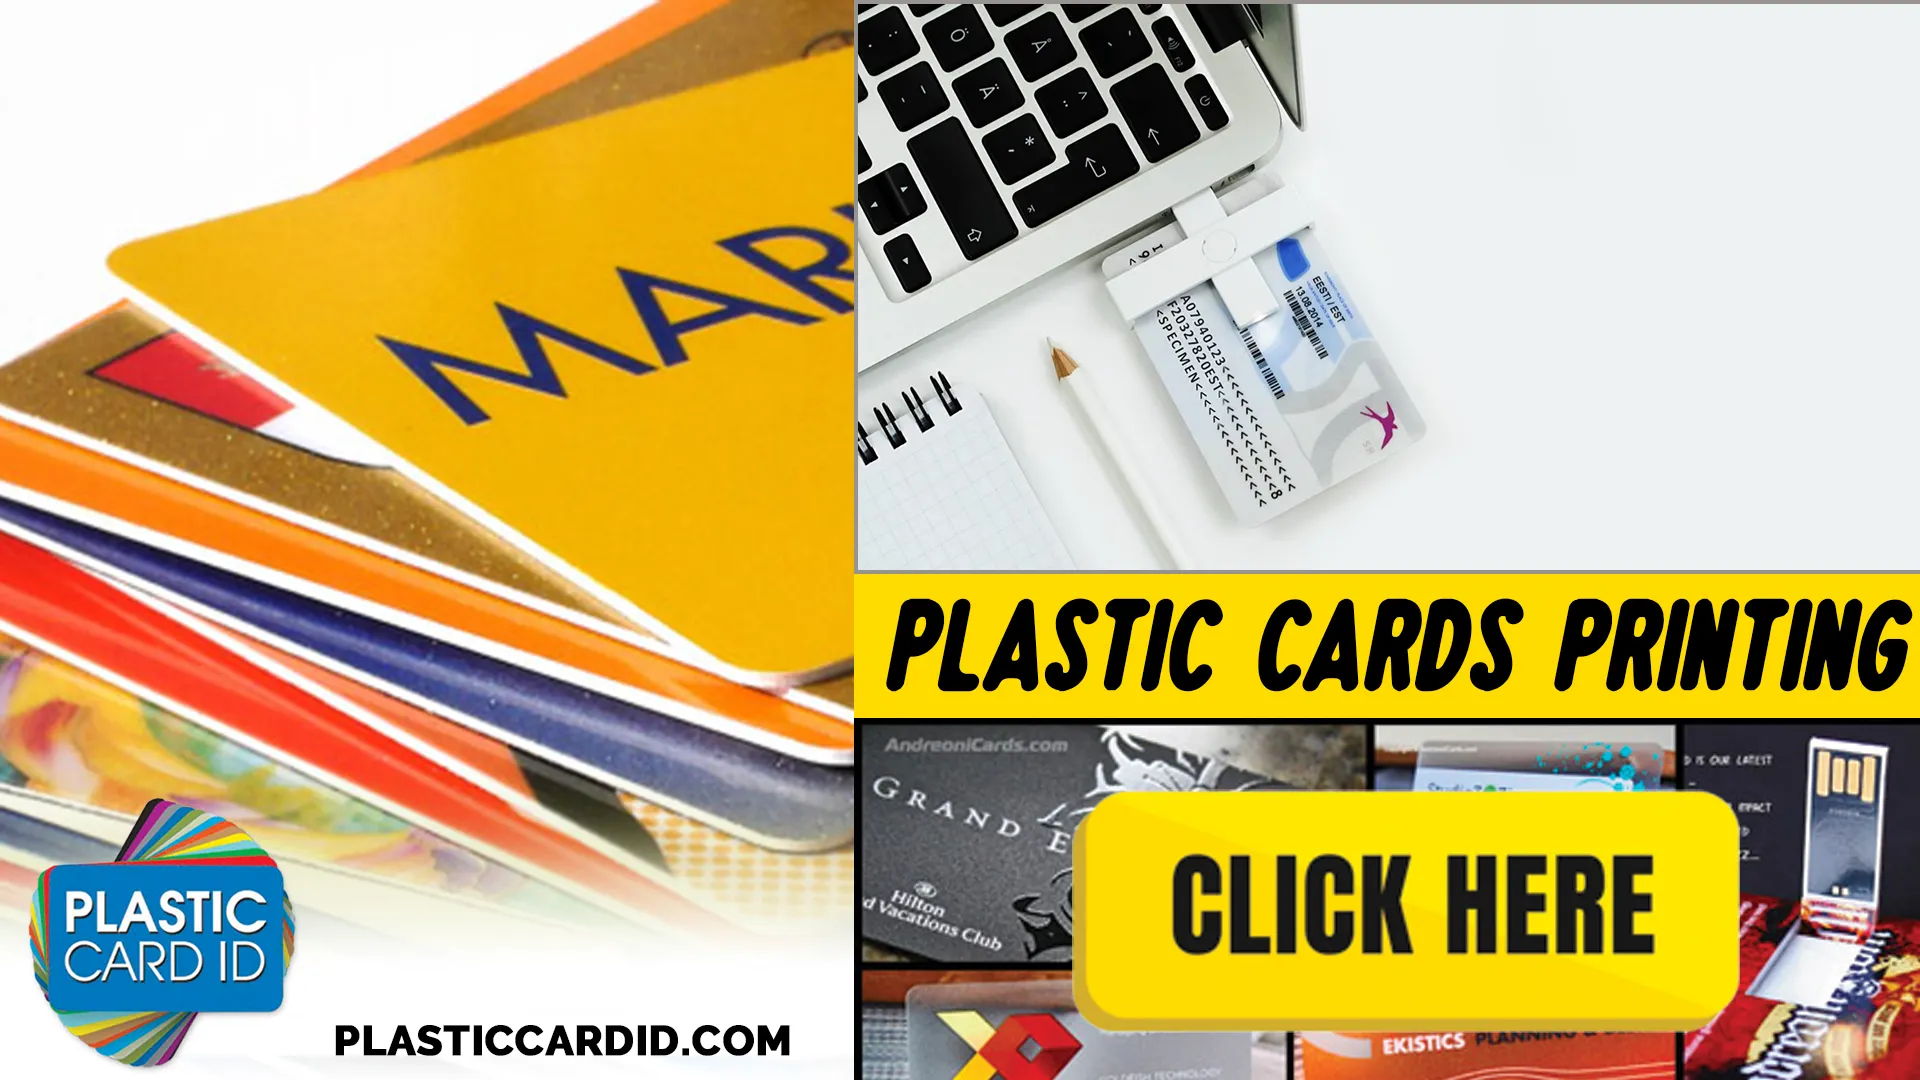 Why Choose Plastic Card ID
 for Your ID and Secure Card Printing Needs?